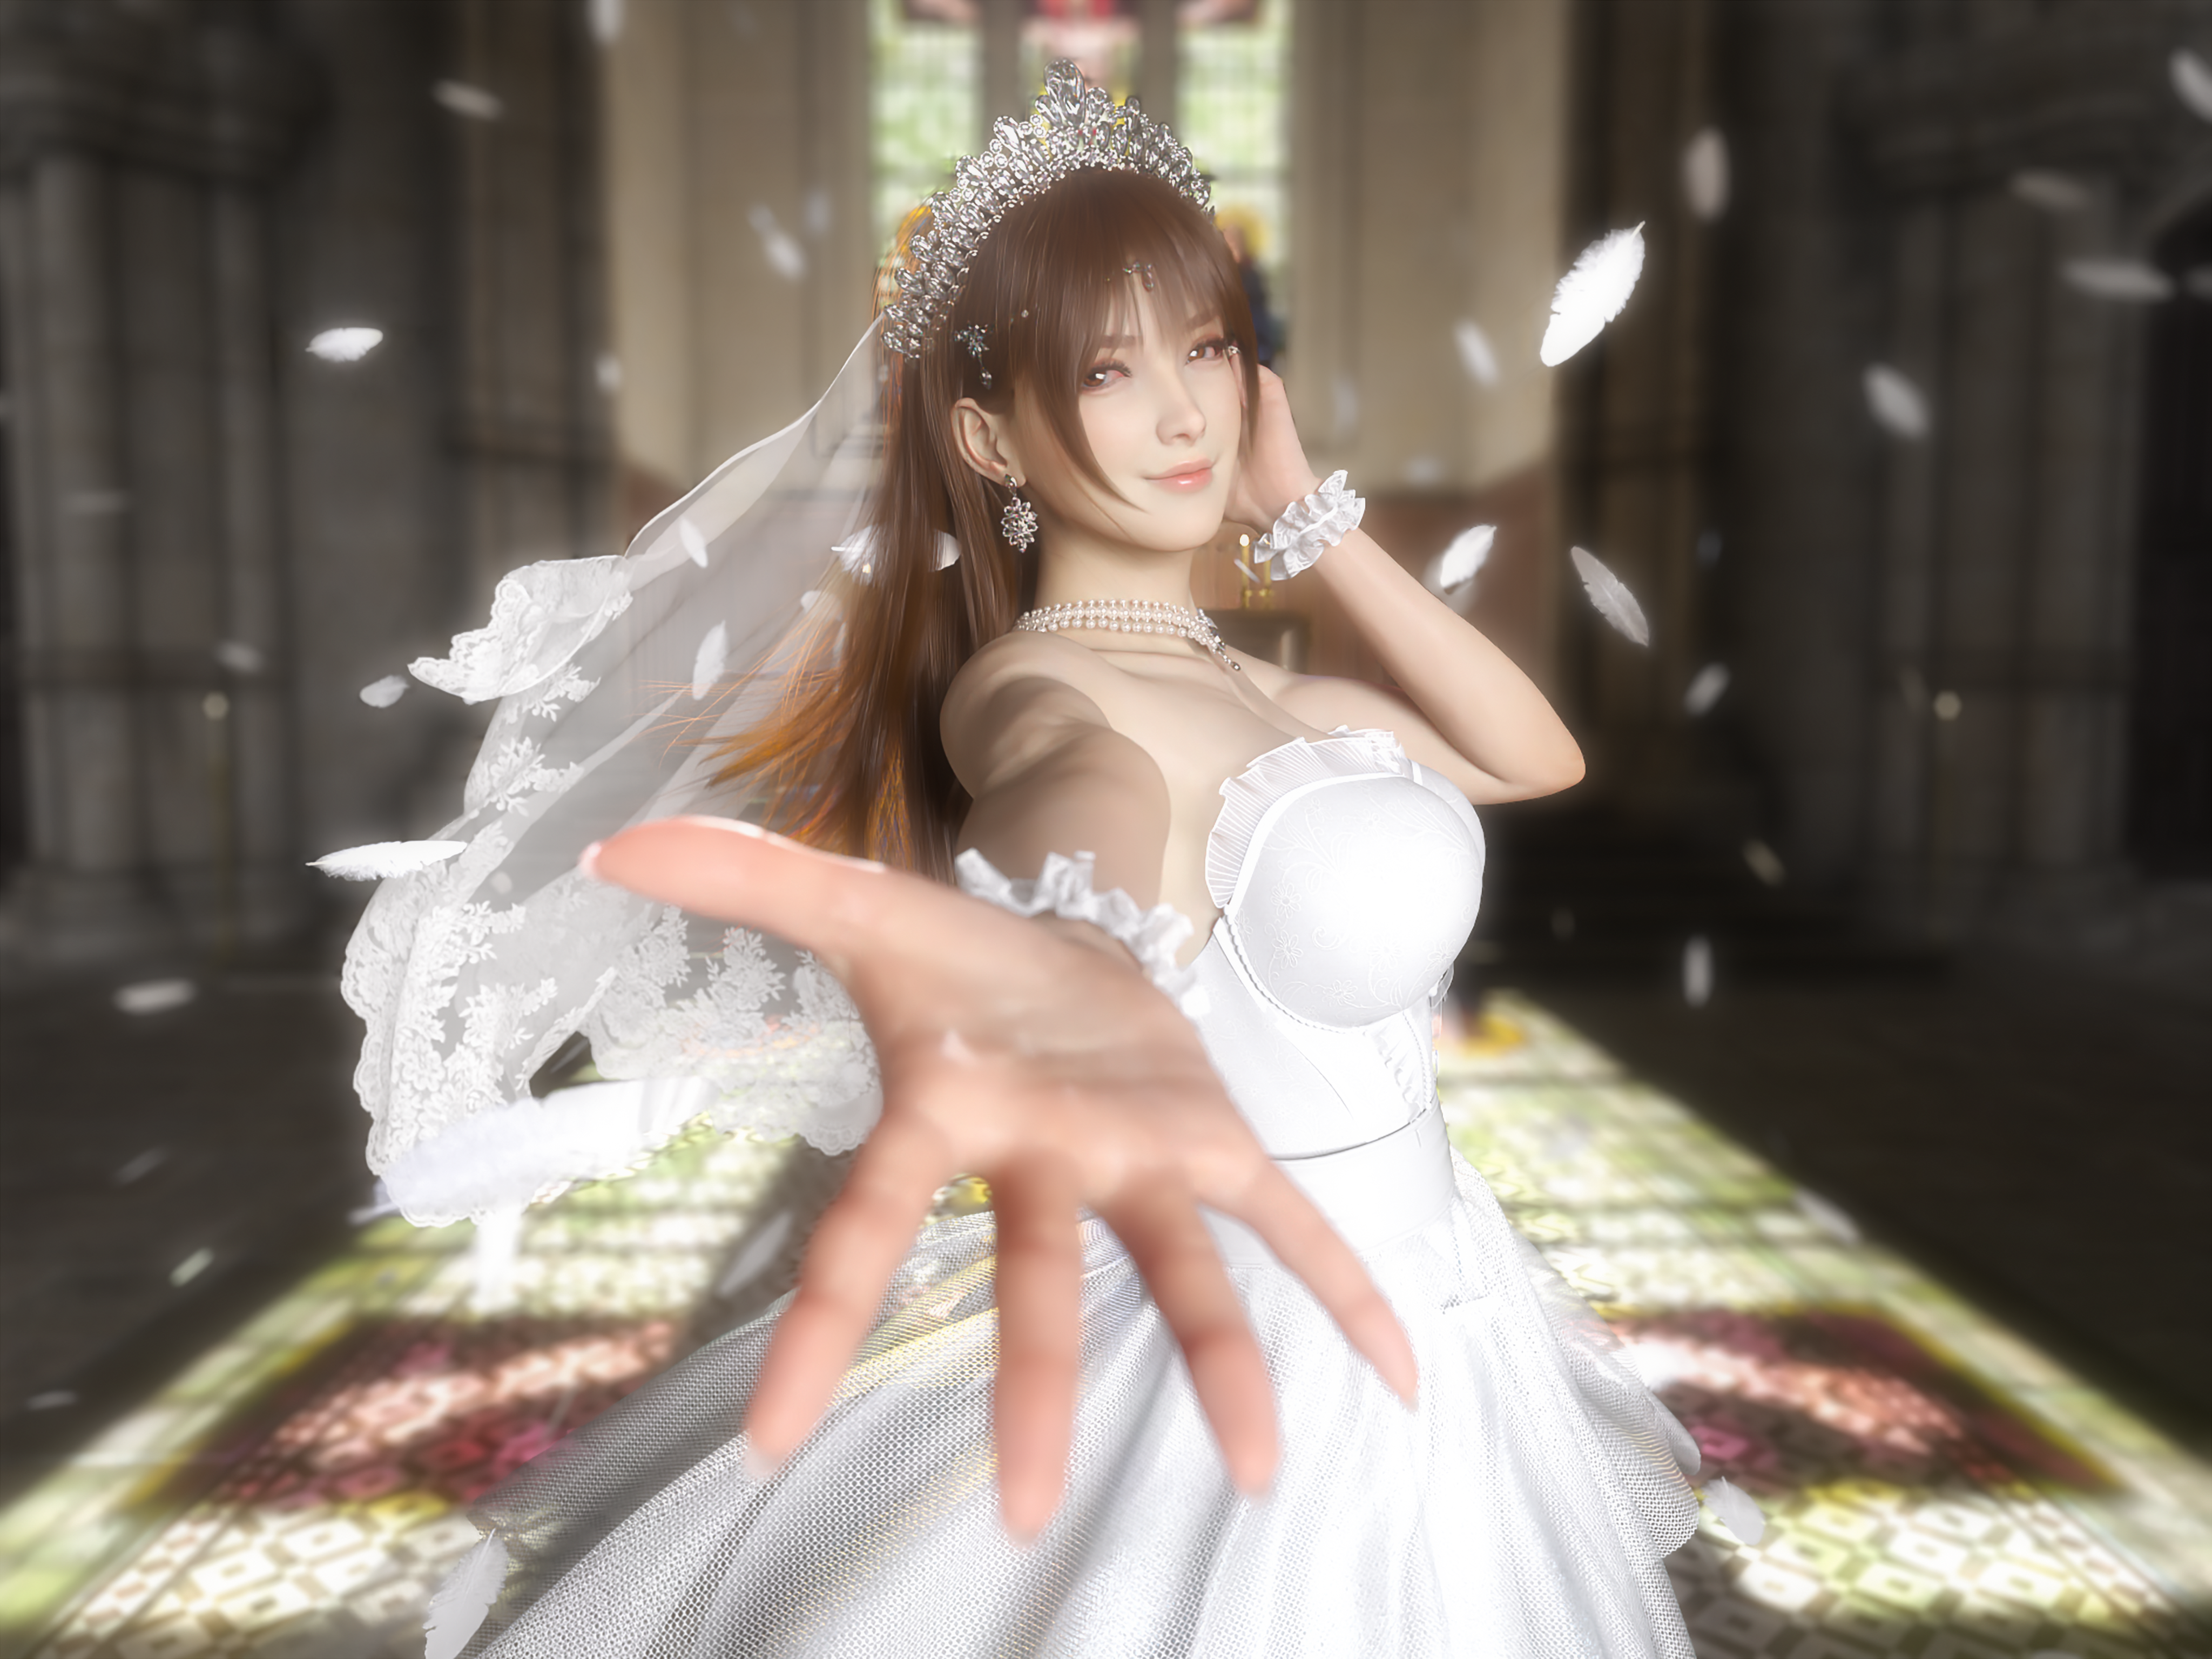 Anime 4096x3072 Kasumi (Dead or Alive) hxwxrf CGI video game girls video game characters Dead or Alive wedding dress arms reaching